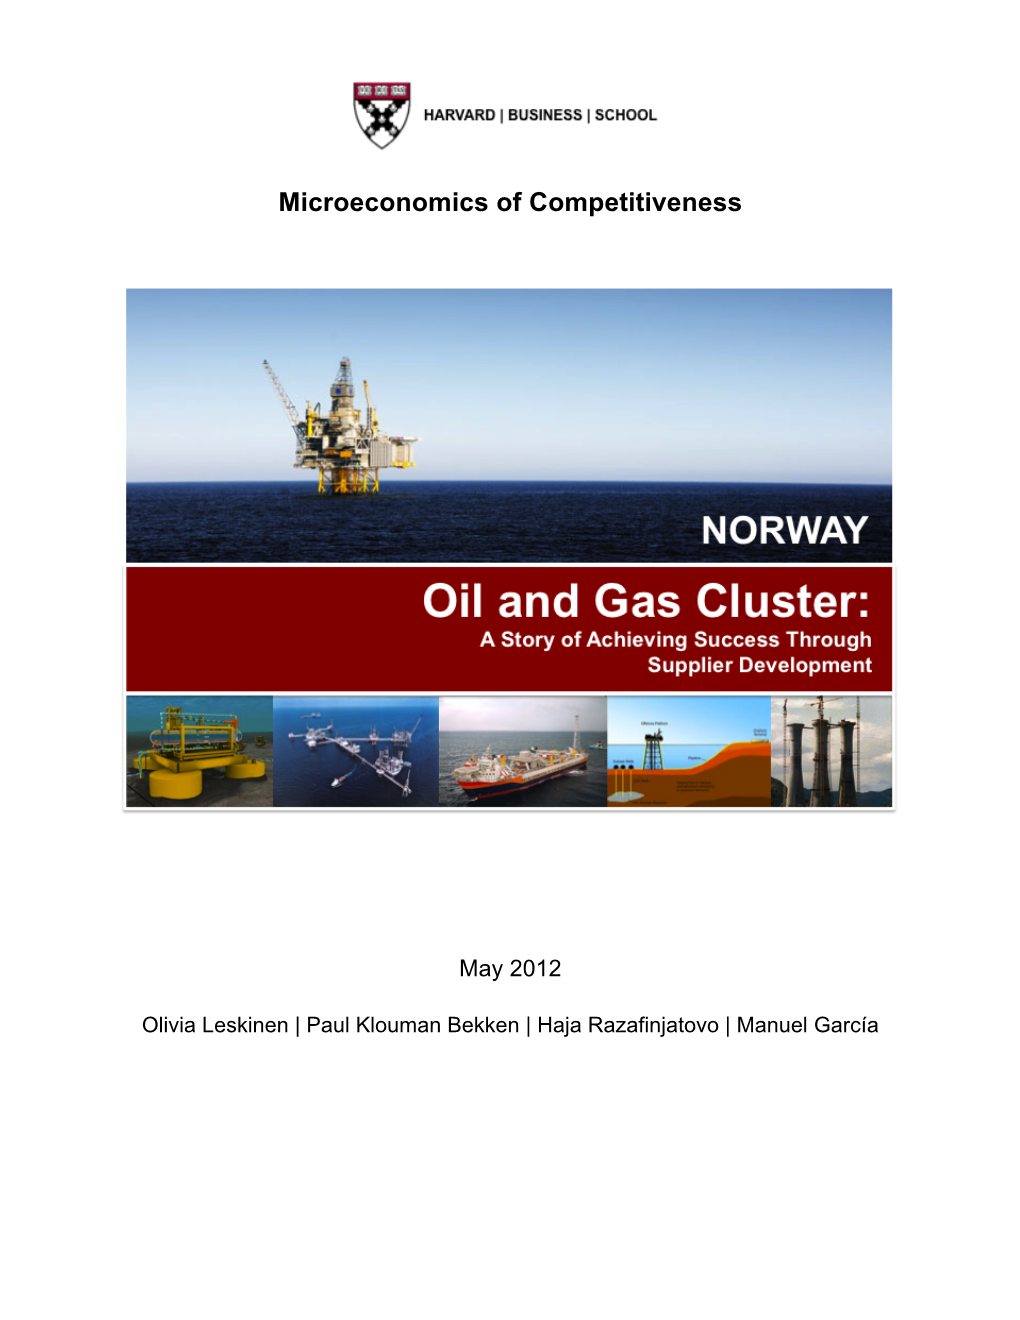 Oil and Gas Cluster in Norway